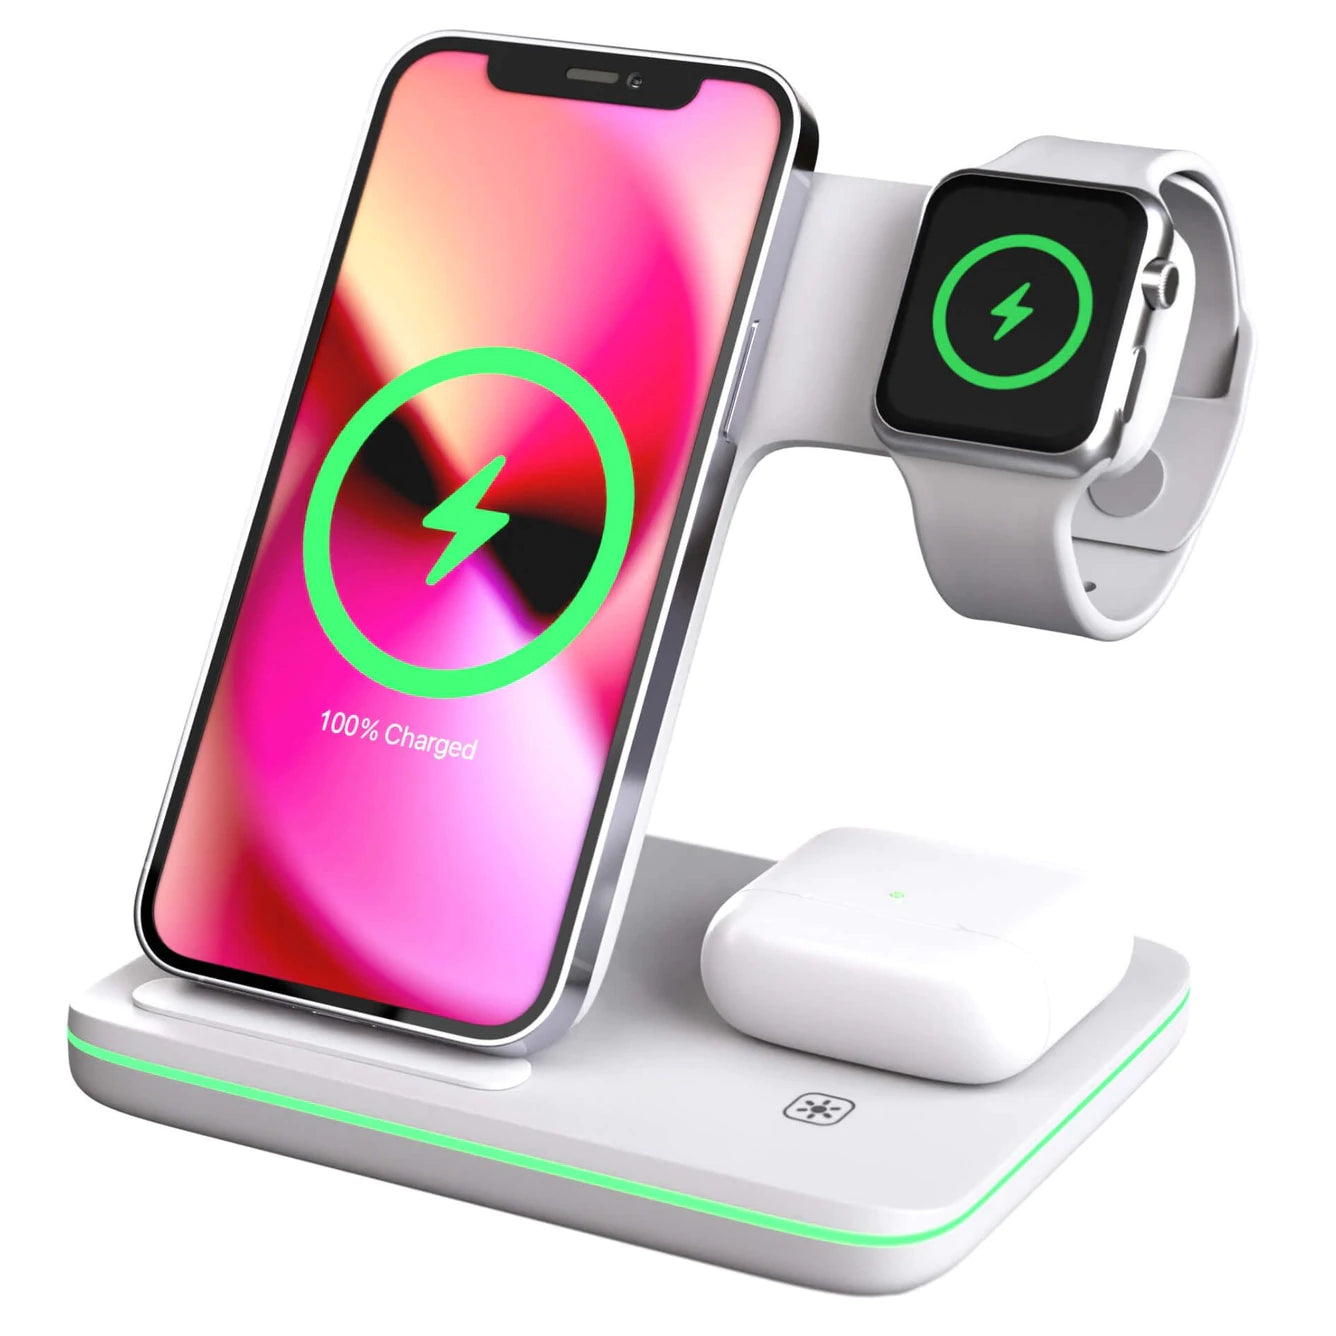 3 in 1 Apple Wireless Charger